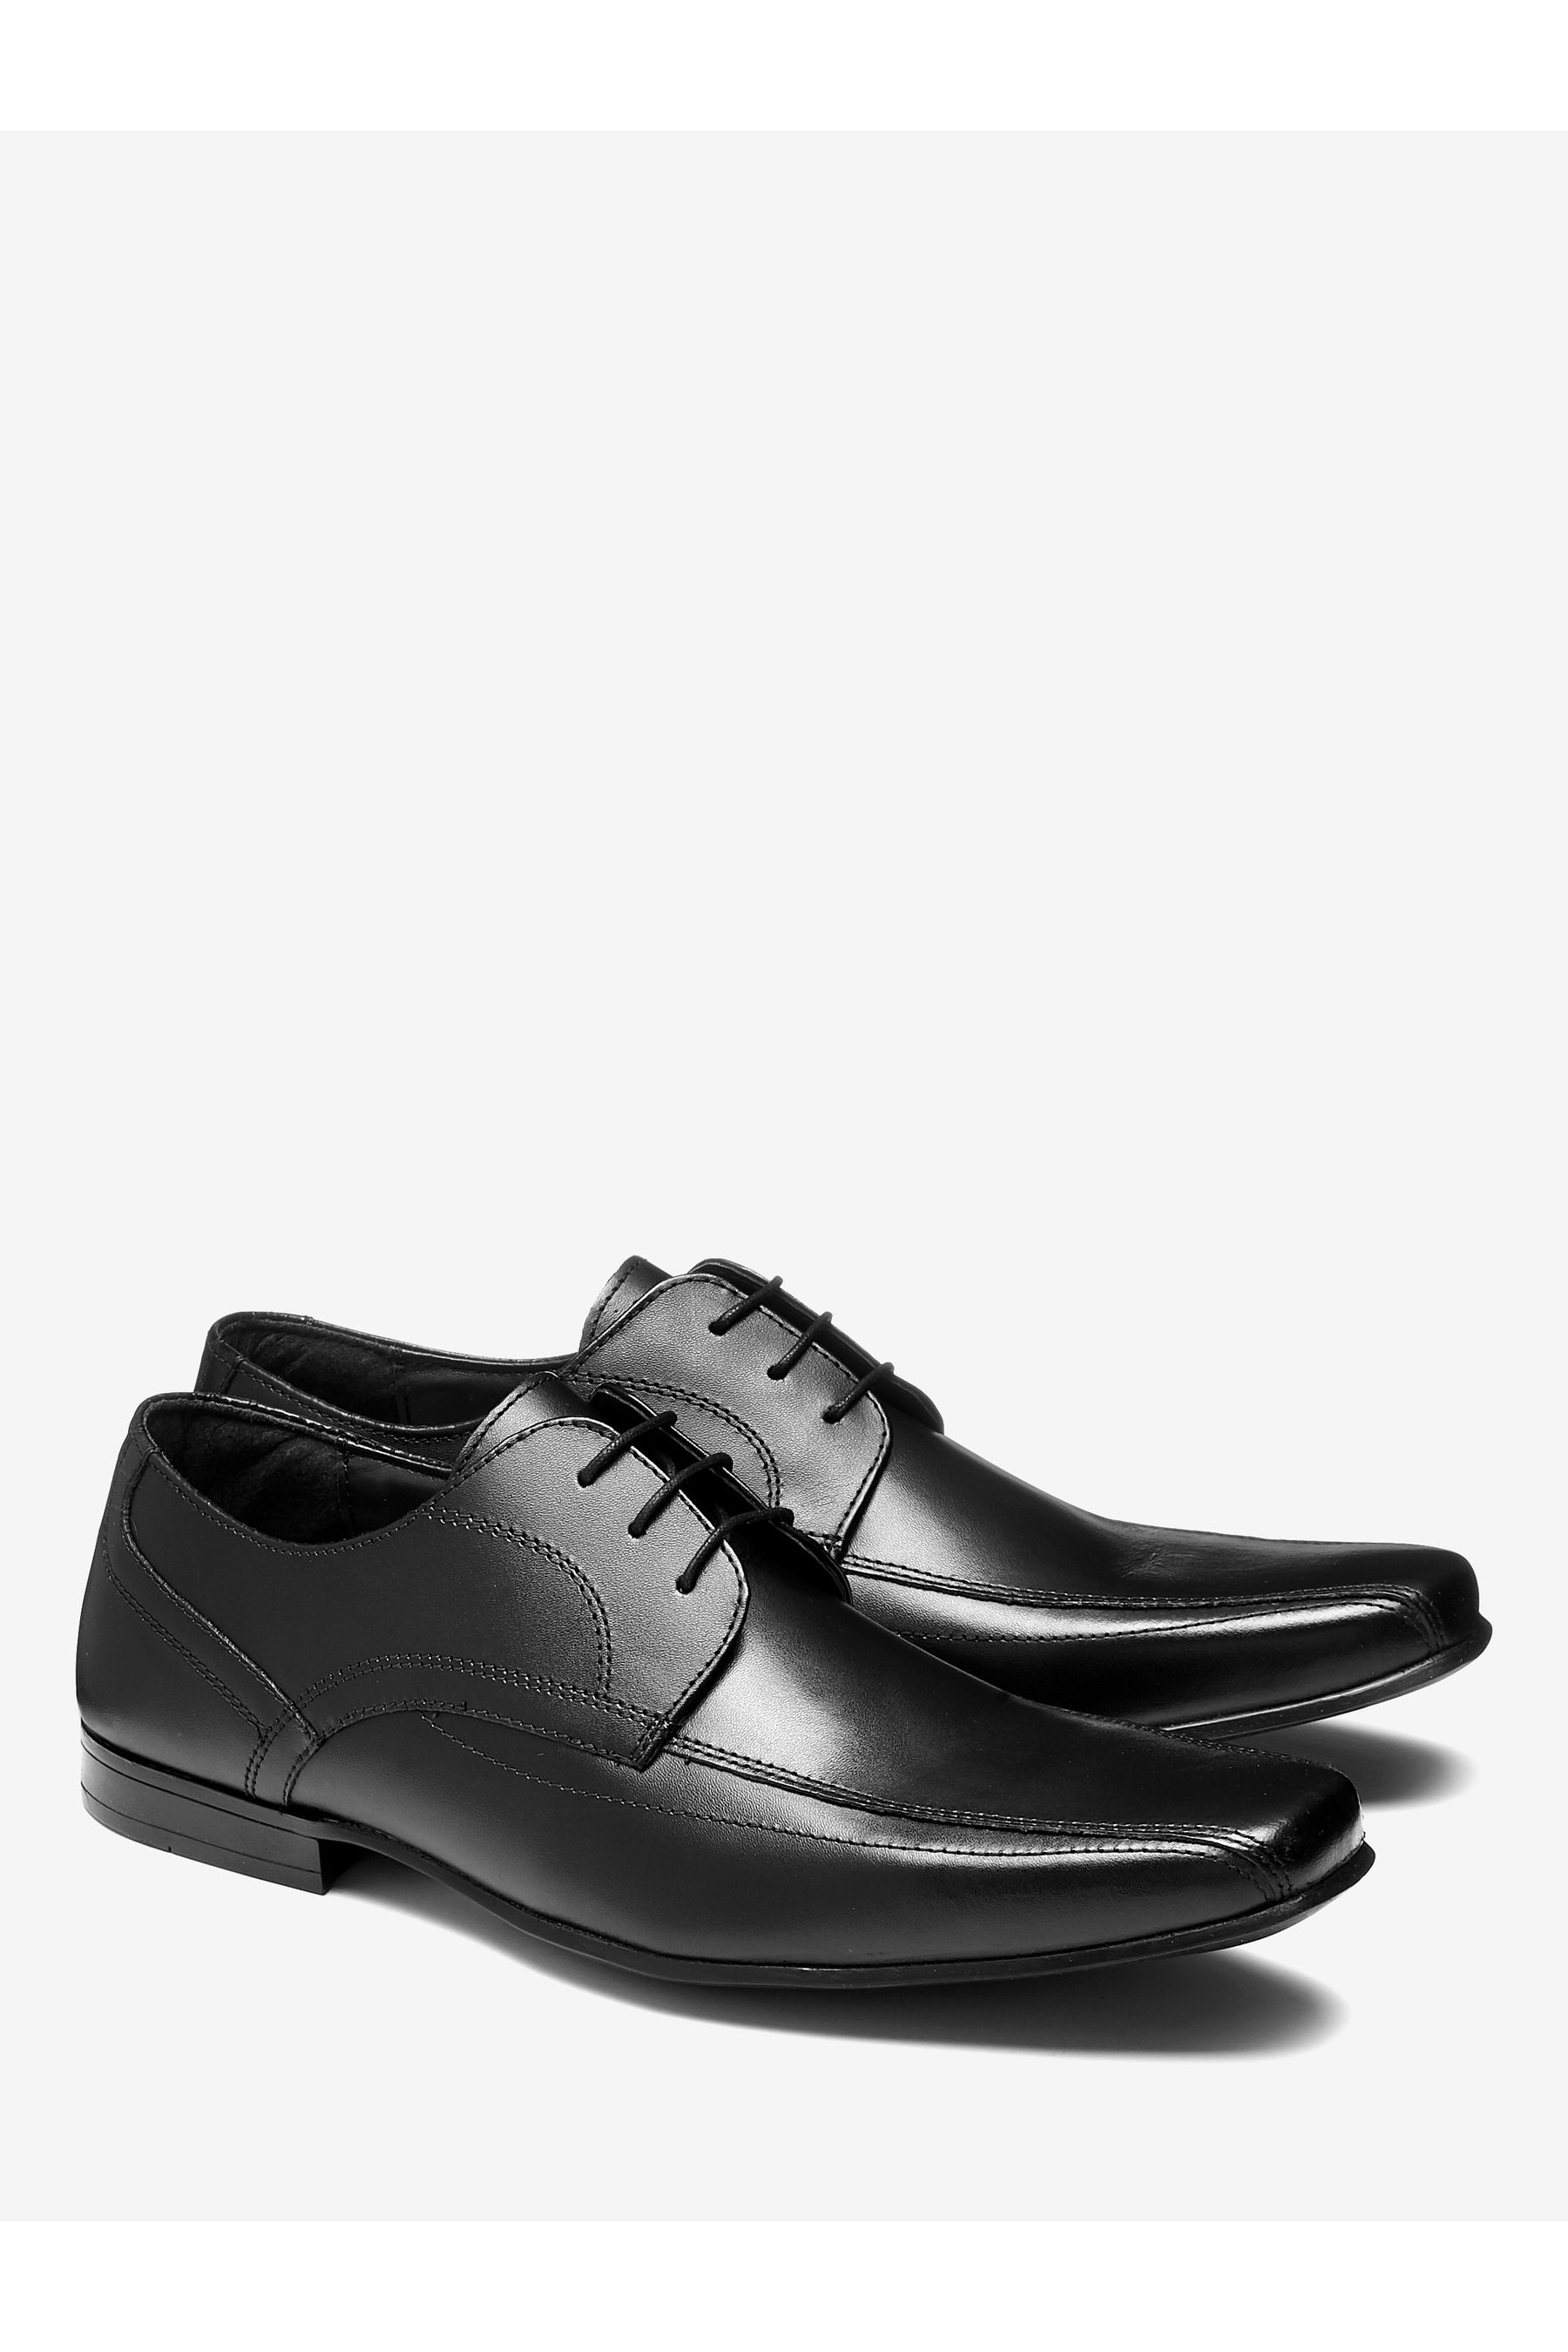 Buy Black Regular Fit Leather Panel Lace-Up Shoes from the Next UK ...